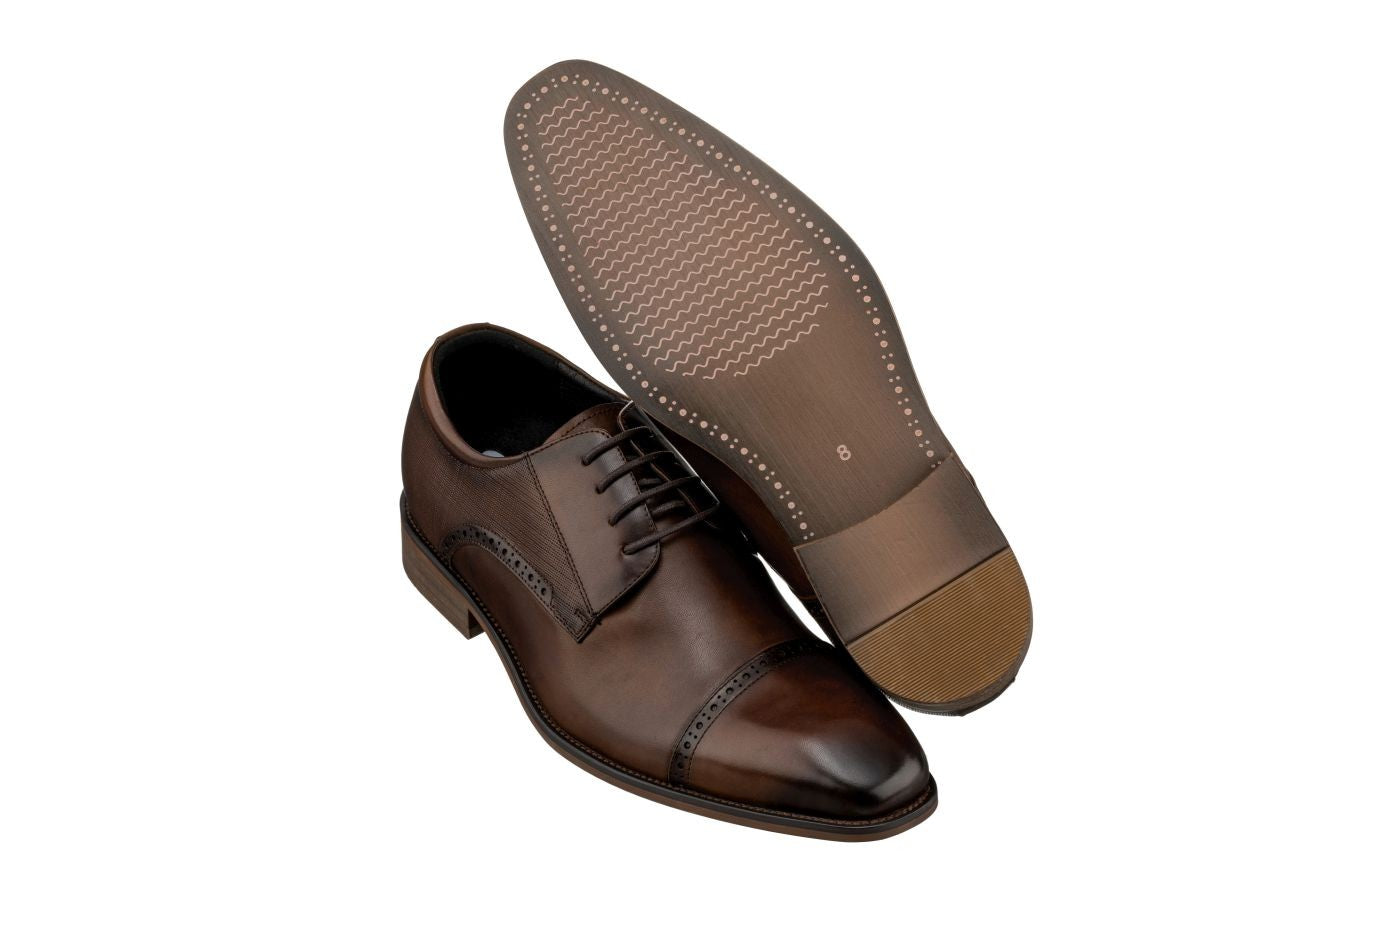 Elevator shoes height increase CALTO - Y6303 - 2.4 Inches Taller (Coffee Brown)